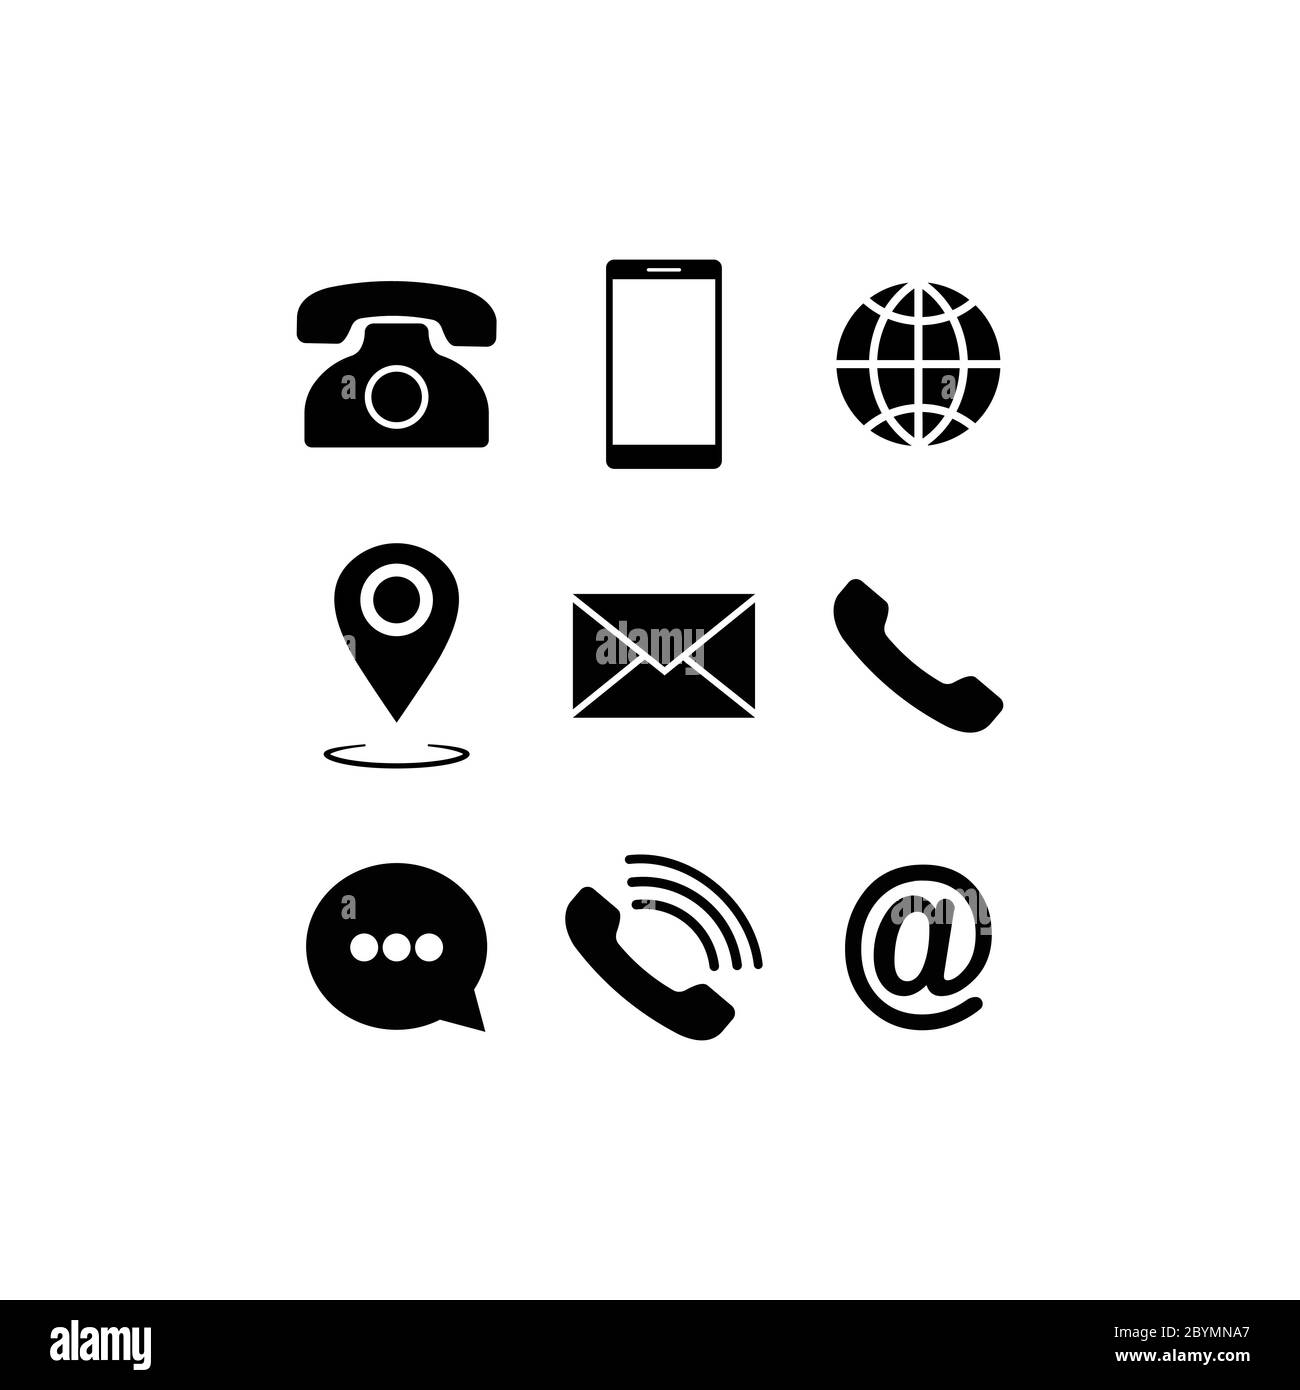 Set of communication icons set. Phone, mobile phone, retro phone, location, mail and web site symbols on isolated white background for applications Stock Vector